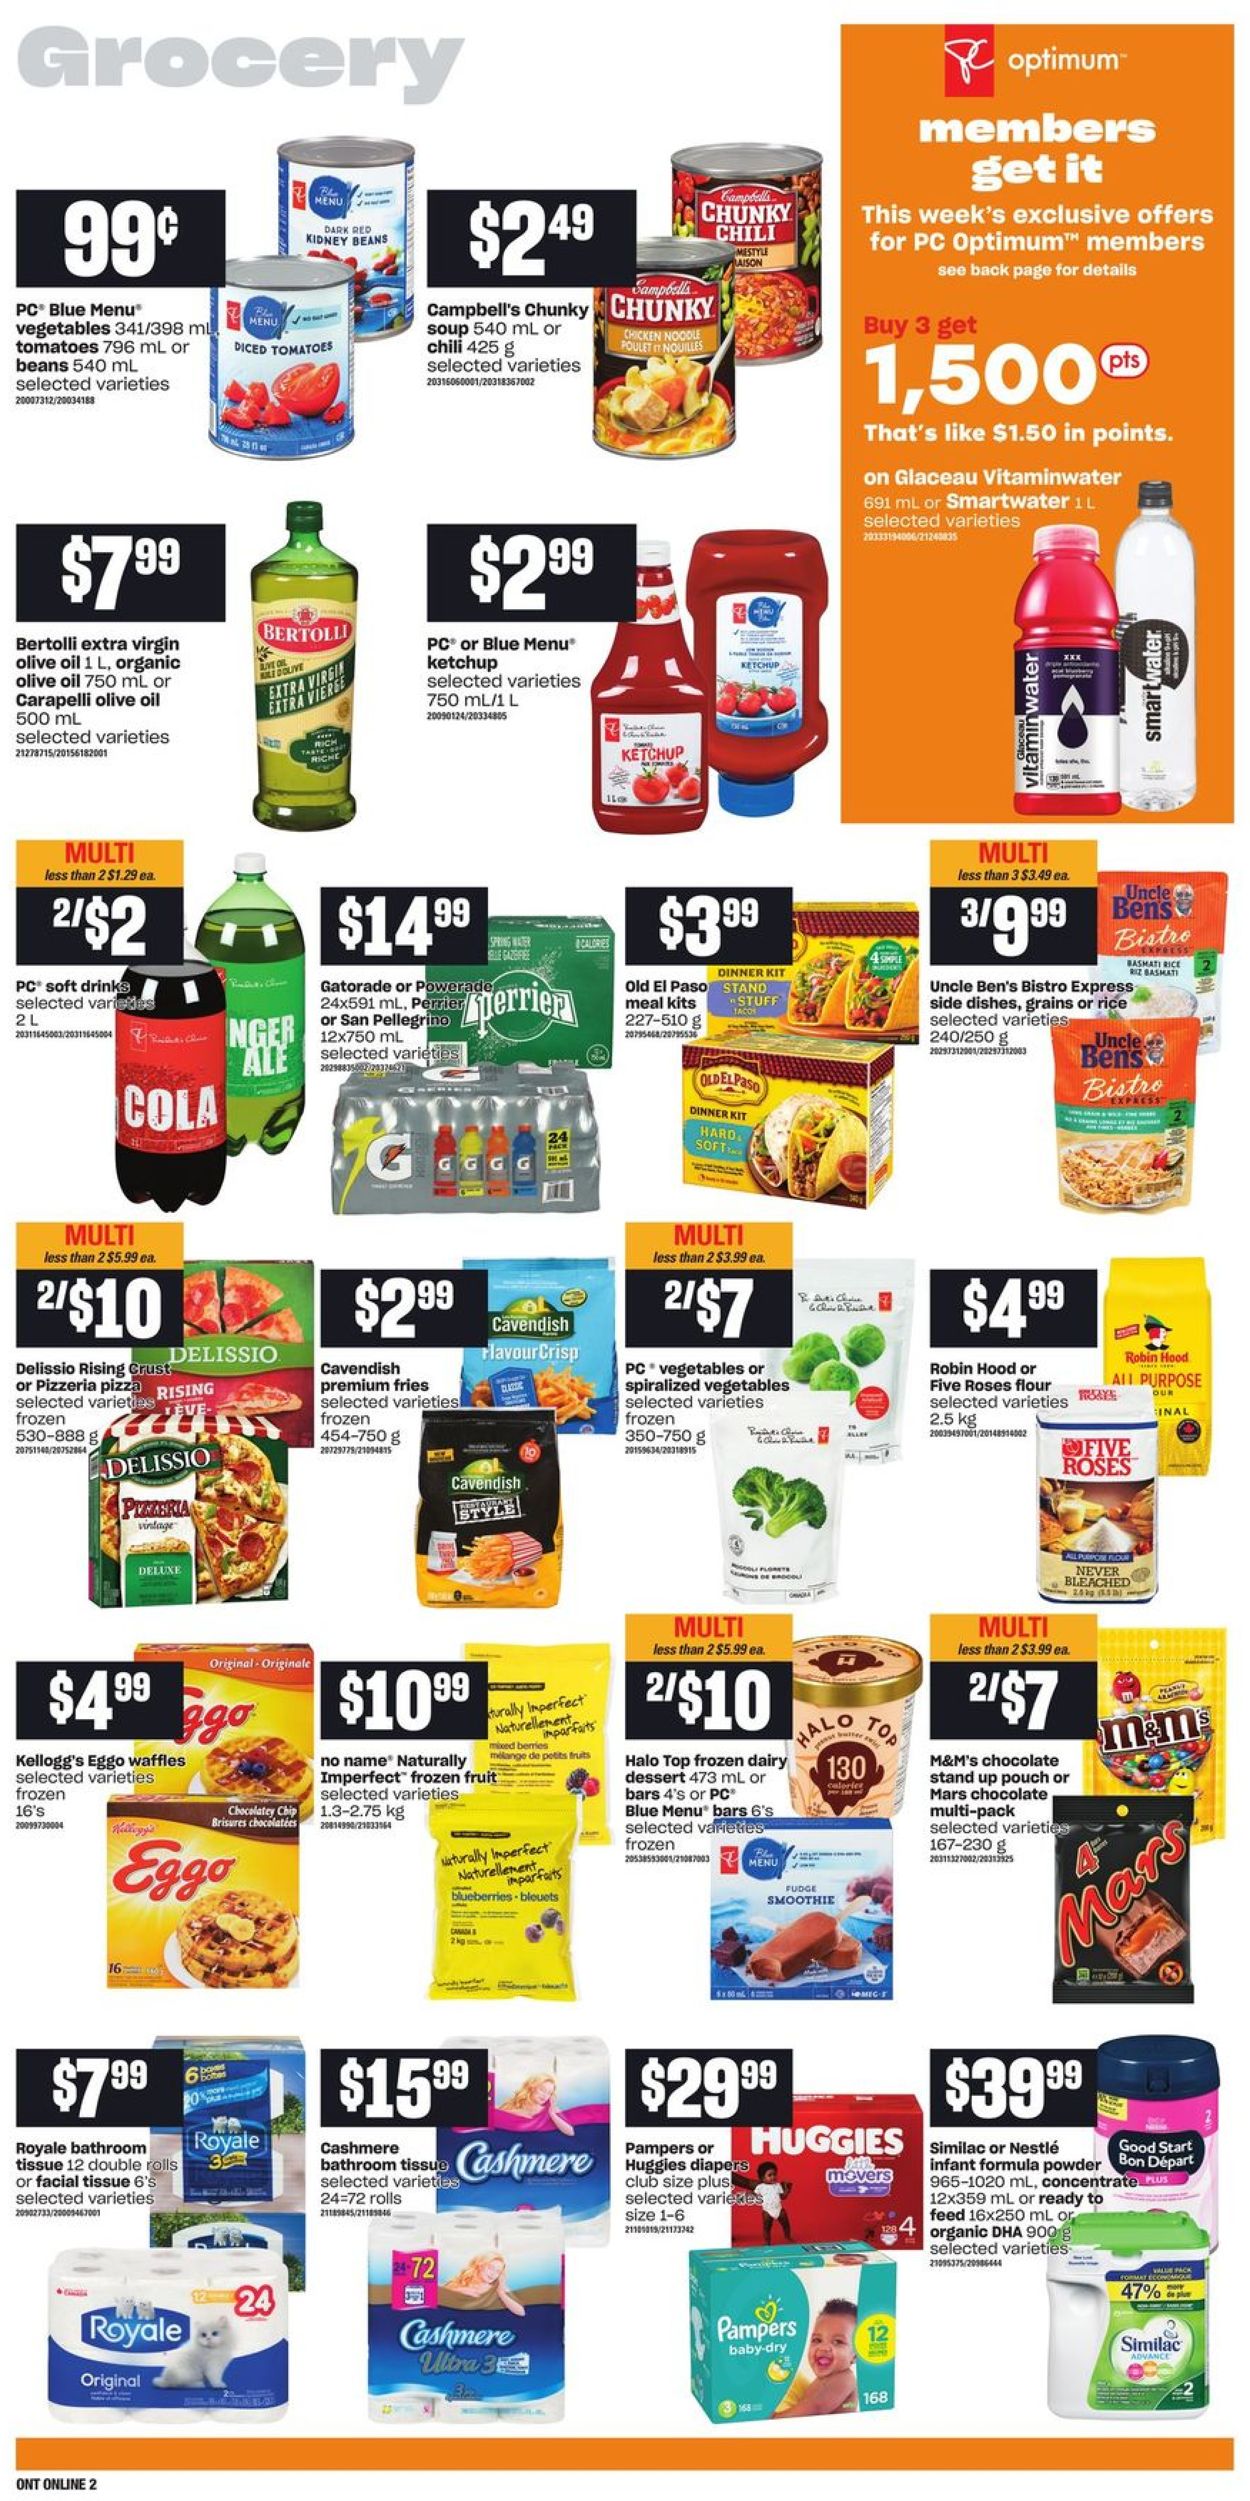 Zehrs Flyer from 12/30/2020